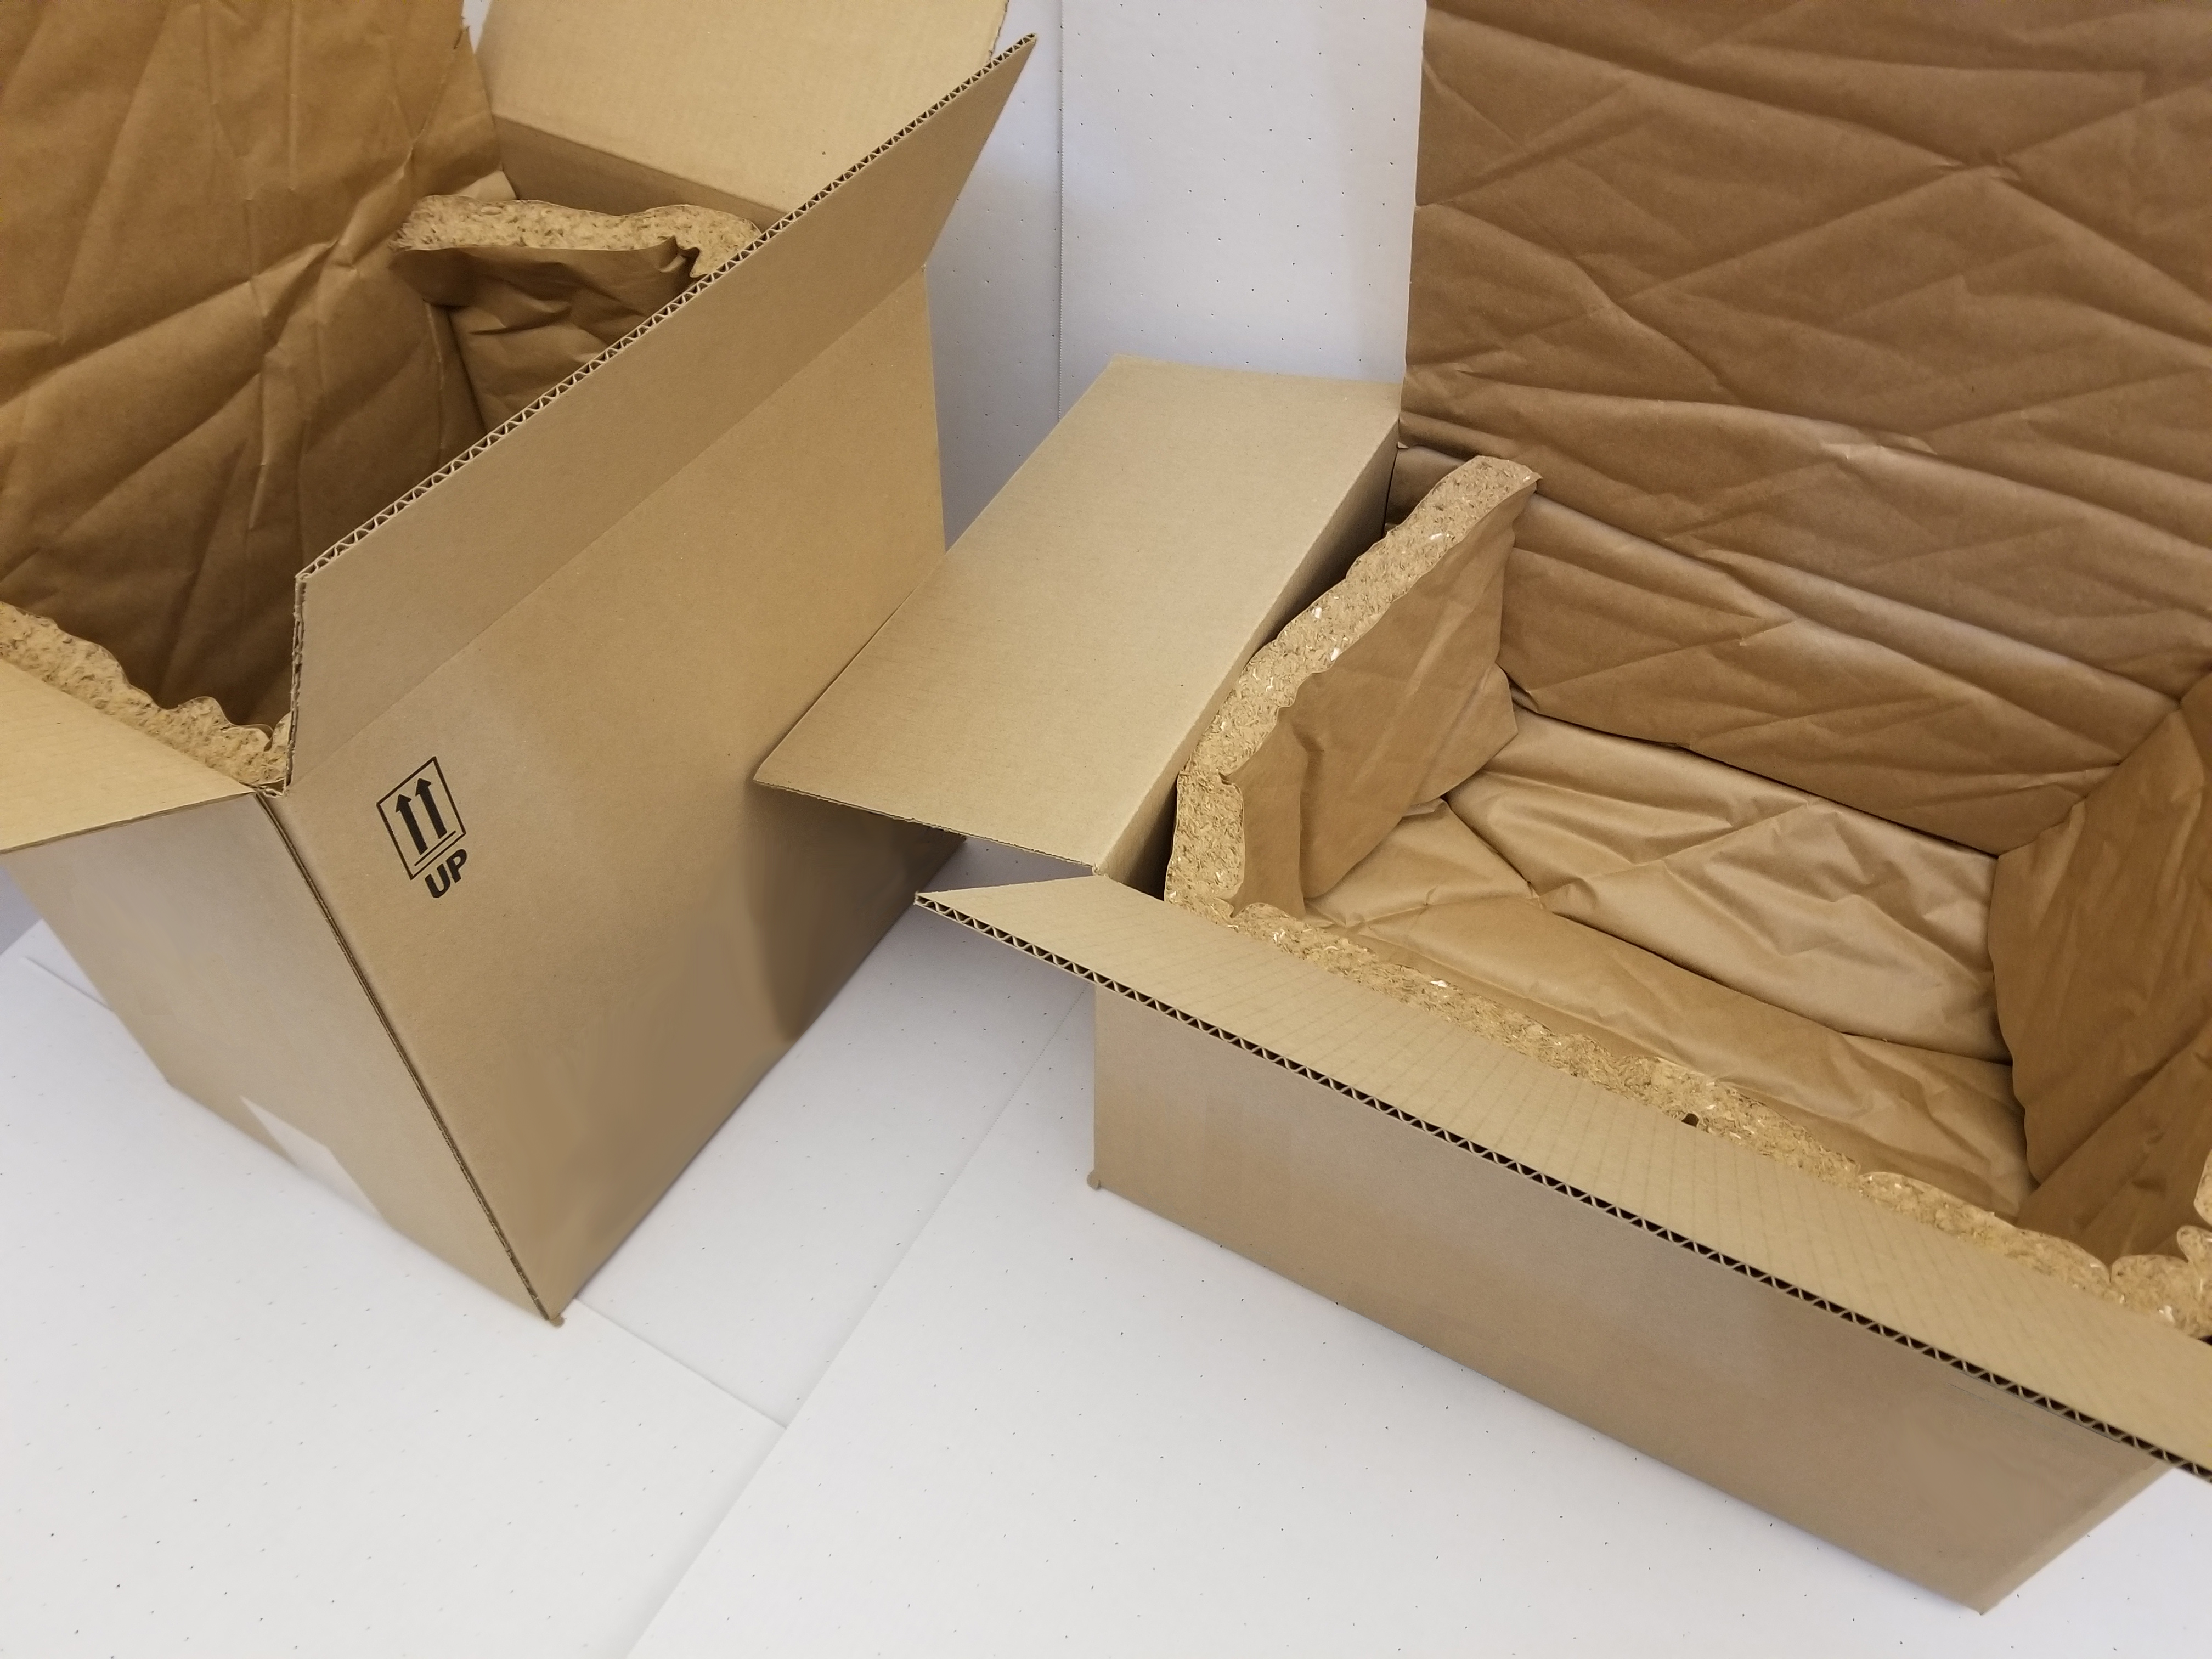 Stamar Packaging insulated packaging boxes